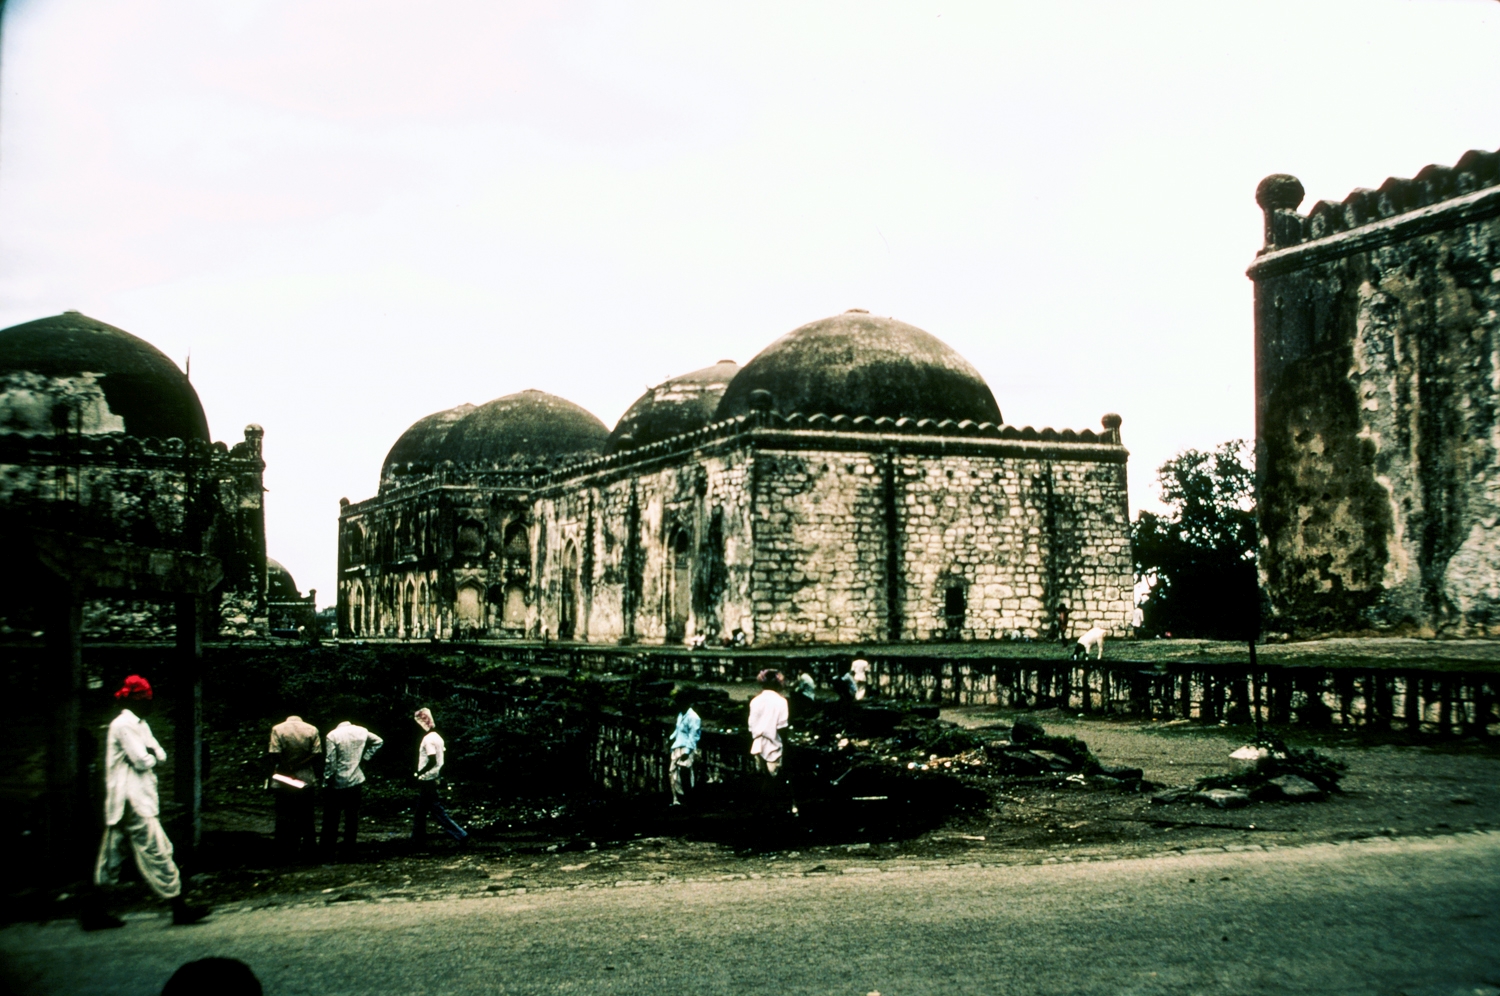 General view of tombs